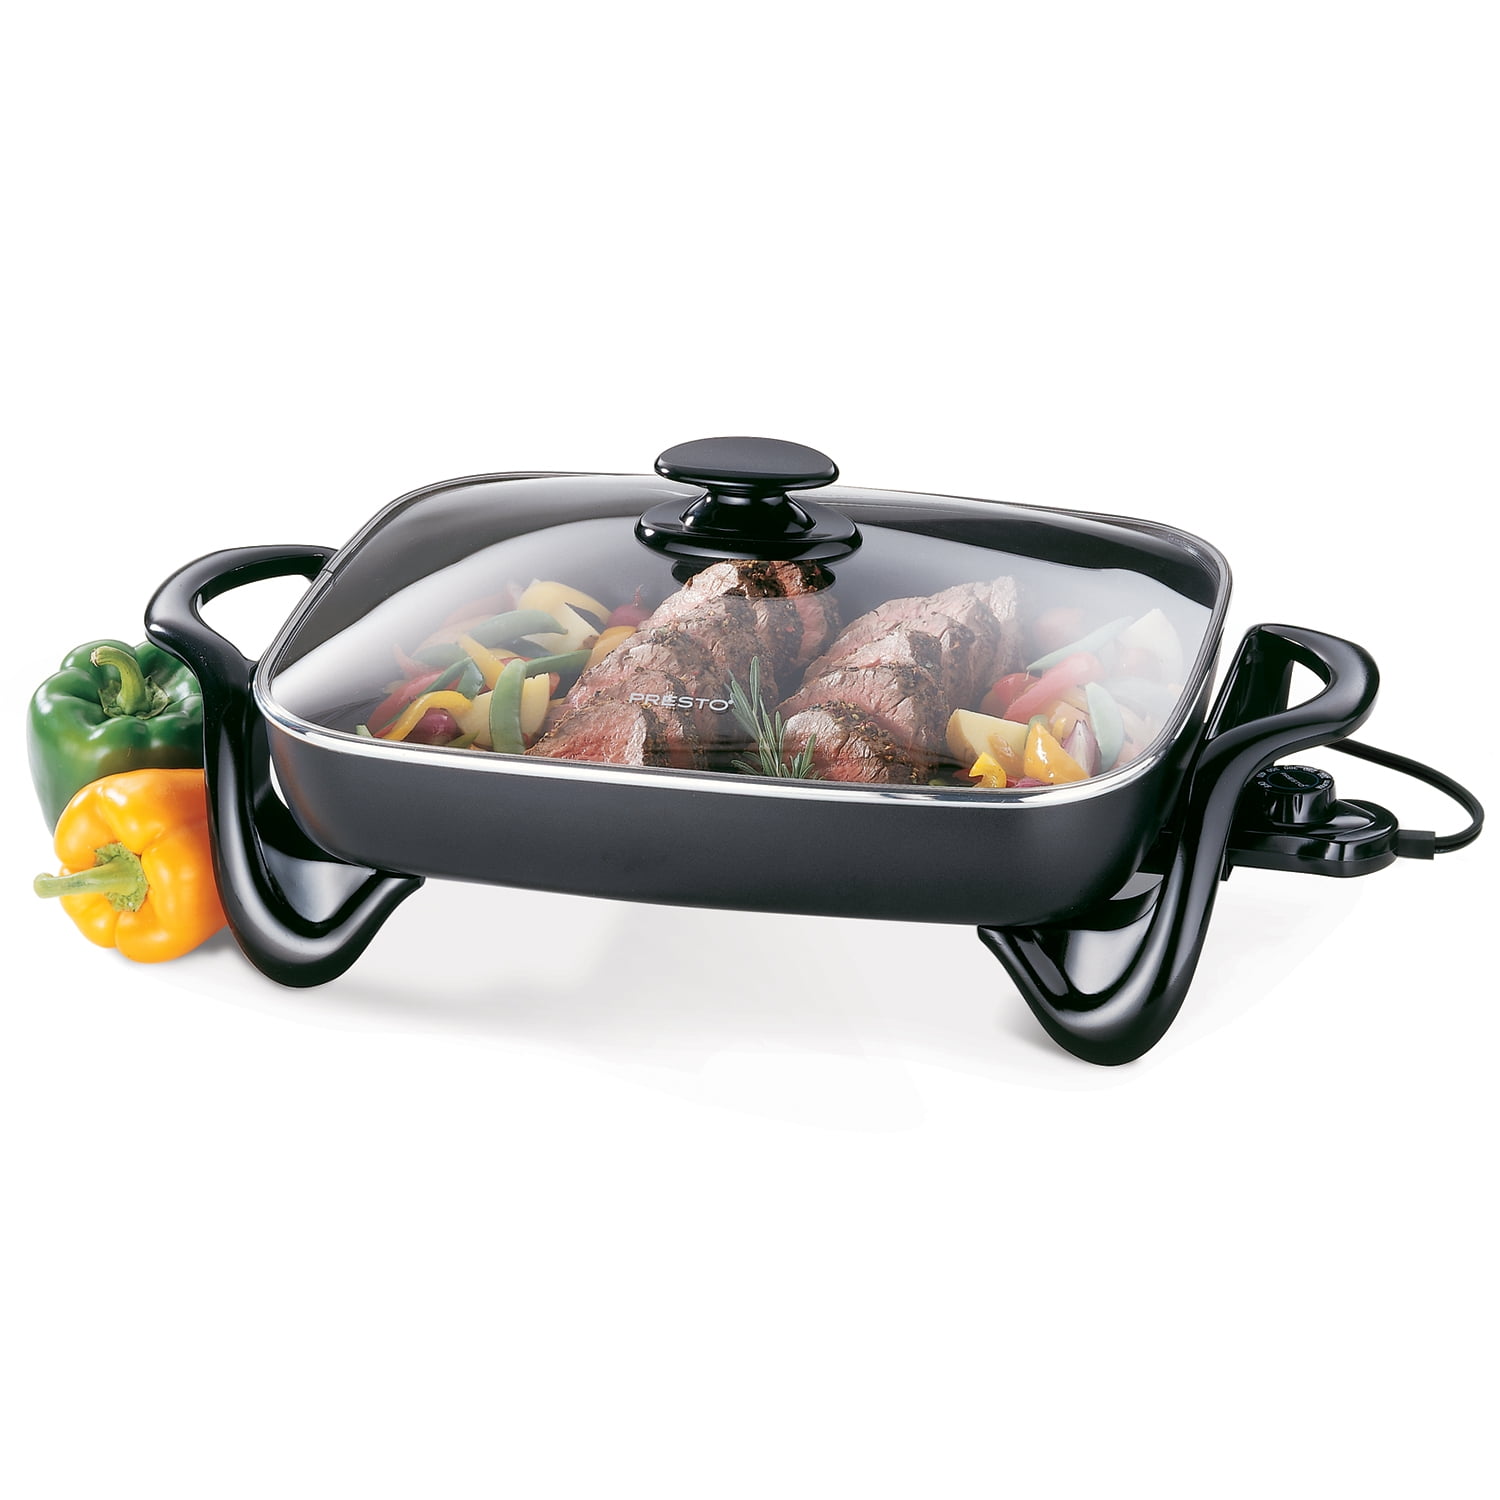 Presto 16-inch Electric Skillet for Roast Fry Grill Stew Bake with glass cover 